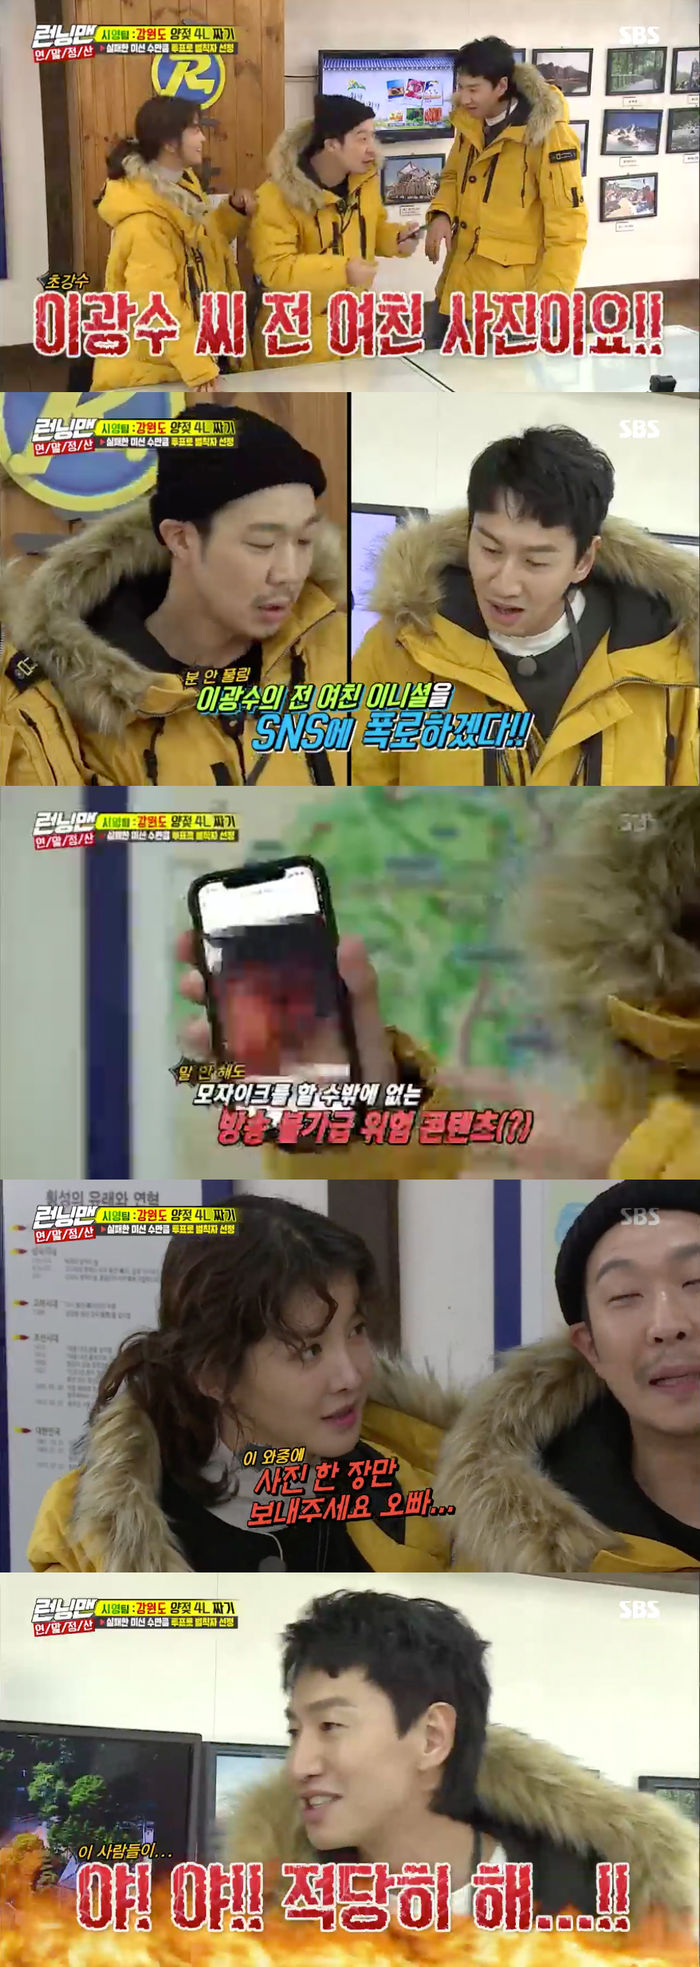 What is the picture of Haha who made Lee Kwang-soo shivering?On SBS Running Man broadcasted on the 9th, we had a vote for the selection of penaltiesOn this day, Lee Si-young, Haha and Lee Kwang-soo have a vote for the selection of penalties.Lee Kwang-soo, who got the first vote in the game, dominated all 13 vote.Haha and Lee Si-young were angry.Haha then said, I will upload a picture of Lee Kwang-soos former woman Friend to SNS. Blackmail - Cinémix Par Chloé to release the vote.Lee Kwang-soo has put out a vote to Haha.But Haha, who was not in the castle, repeatedly said, I will only raise the initials of the former woman Friend. He repeatedly blackmailed Lee Kwang-soo - Cinémix Par Chloé.Lee Kwang-soo then turned the vote back to Haha and said, Dont do this, its my brother Lee Kwang-soo.Haha said, Do not be so dirty, about Lee Si-young, who wonders Lee Kwang-soo and Hahas quarrel.Blackmail to Lee Kwang-soo in Haha – Cinémix Par Chloé is not over.Haha told Lee Kwang-soo, Ill show you the first chapter, and put up a picture of Lee Kwang-soo, who is not available for broadcasting, and to release the vote.He then threatened, If you do not give me more vote, I will remove the mosaic and release the photos.Haha also said that there was a video, and he blackmailed him - Cinémix Par Chloé with the content of Lee Kwang-soo.Lee Si-young, who saw it, said, I just have to give it to you, but why did you do it, did you drink?When Haha continued to obtain vote with content related to Lee Kwang-soo, Lee Si-young told Haha to send me a picture, and Lee Kwang-soo, who saw it, said, Hey, hey!Do it moderately! he burst into the eye.